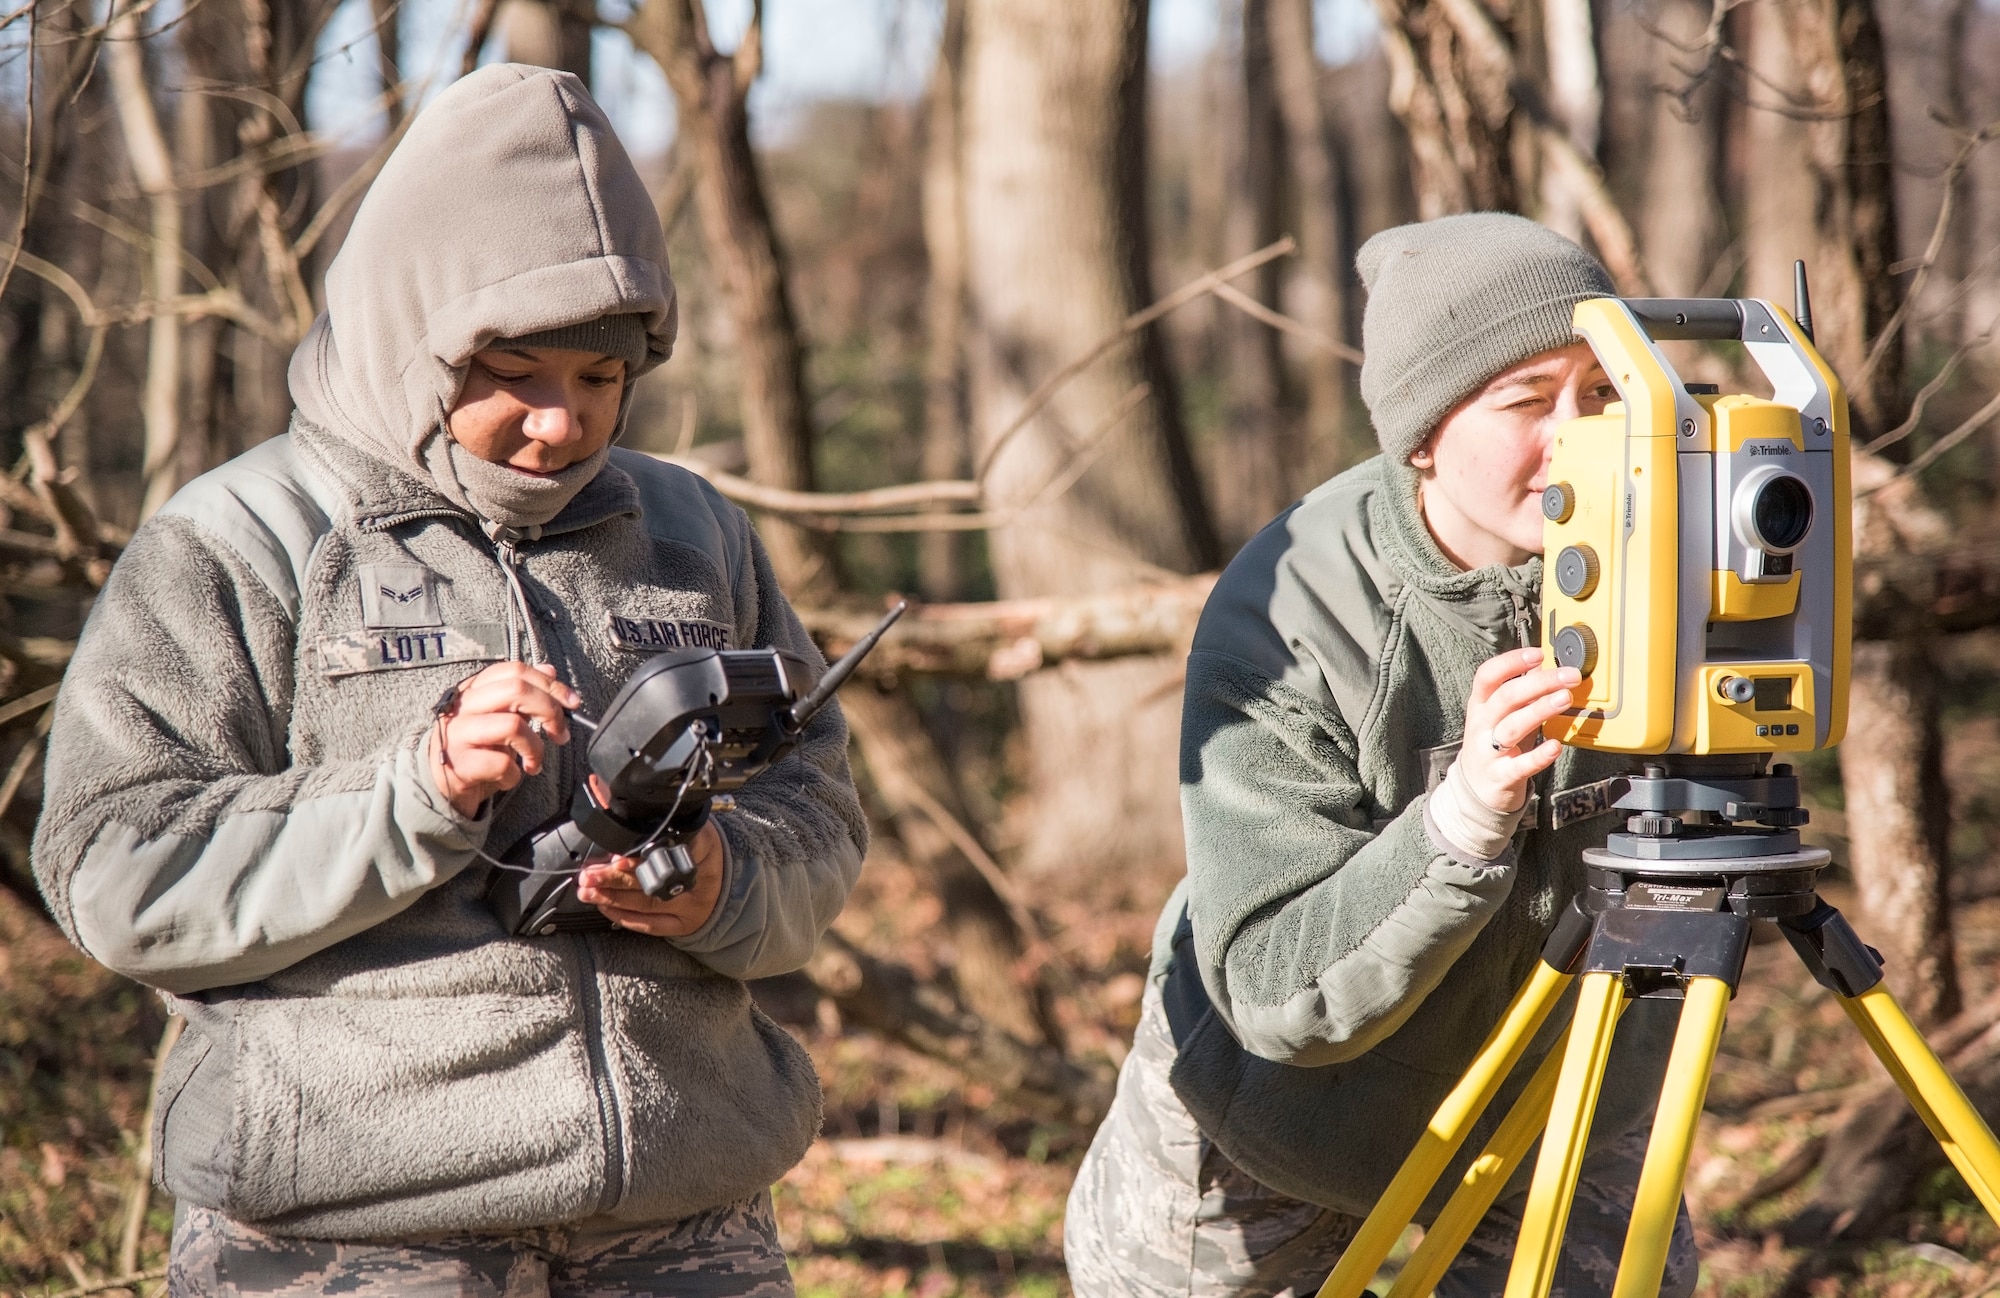 Airman 1st Class Alishia Lott and Angela Schnedler, 436th Civil Engineer Squadron engineering journeymen use surveying equipment to record debris location during an aircraft mishap survey exercise Dec. 18, 2018, near Killens Pond State Park, Kent County, Del. Lott and Schnedler documented the exact location of miscellaneous aircraft and aircrew items of a simulated T-38 Talon aircraft mishap using GPS satellites. (U.S. Air Force photo by Roland Balik)